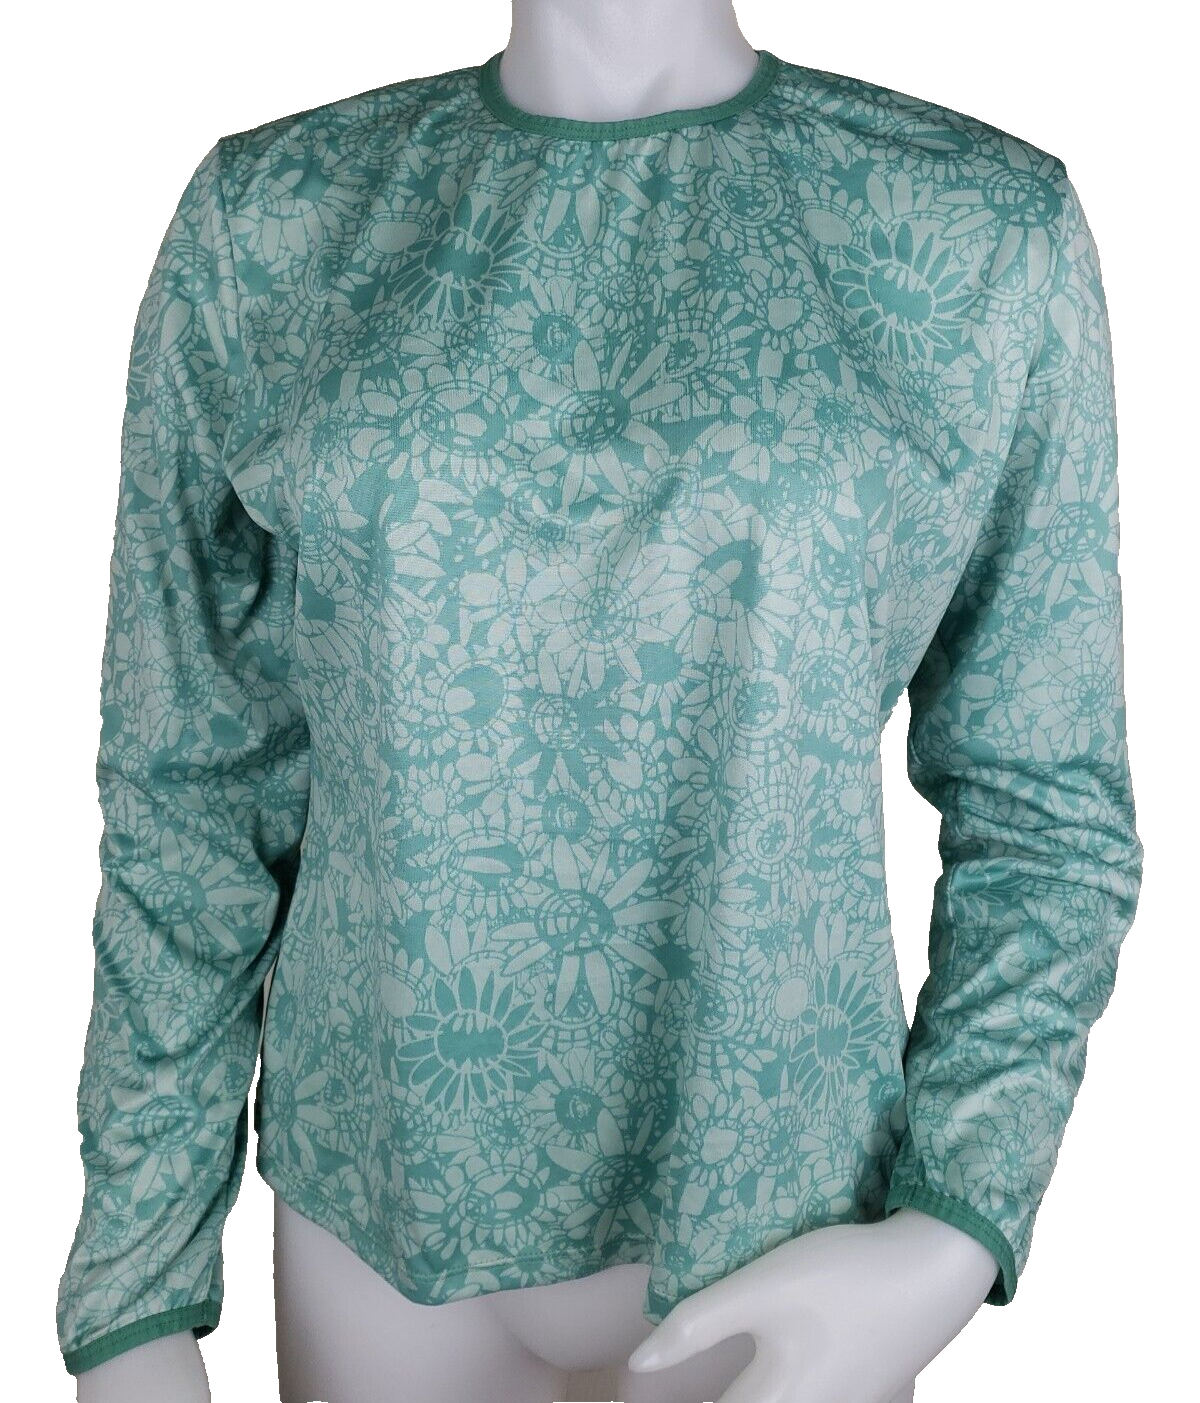 Primary image for Patagonia Capilene Top Womens L Green Floral Base Layer Long Sleeve Shirt USA